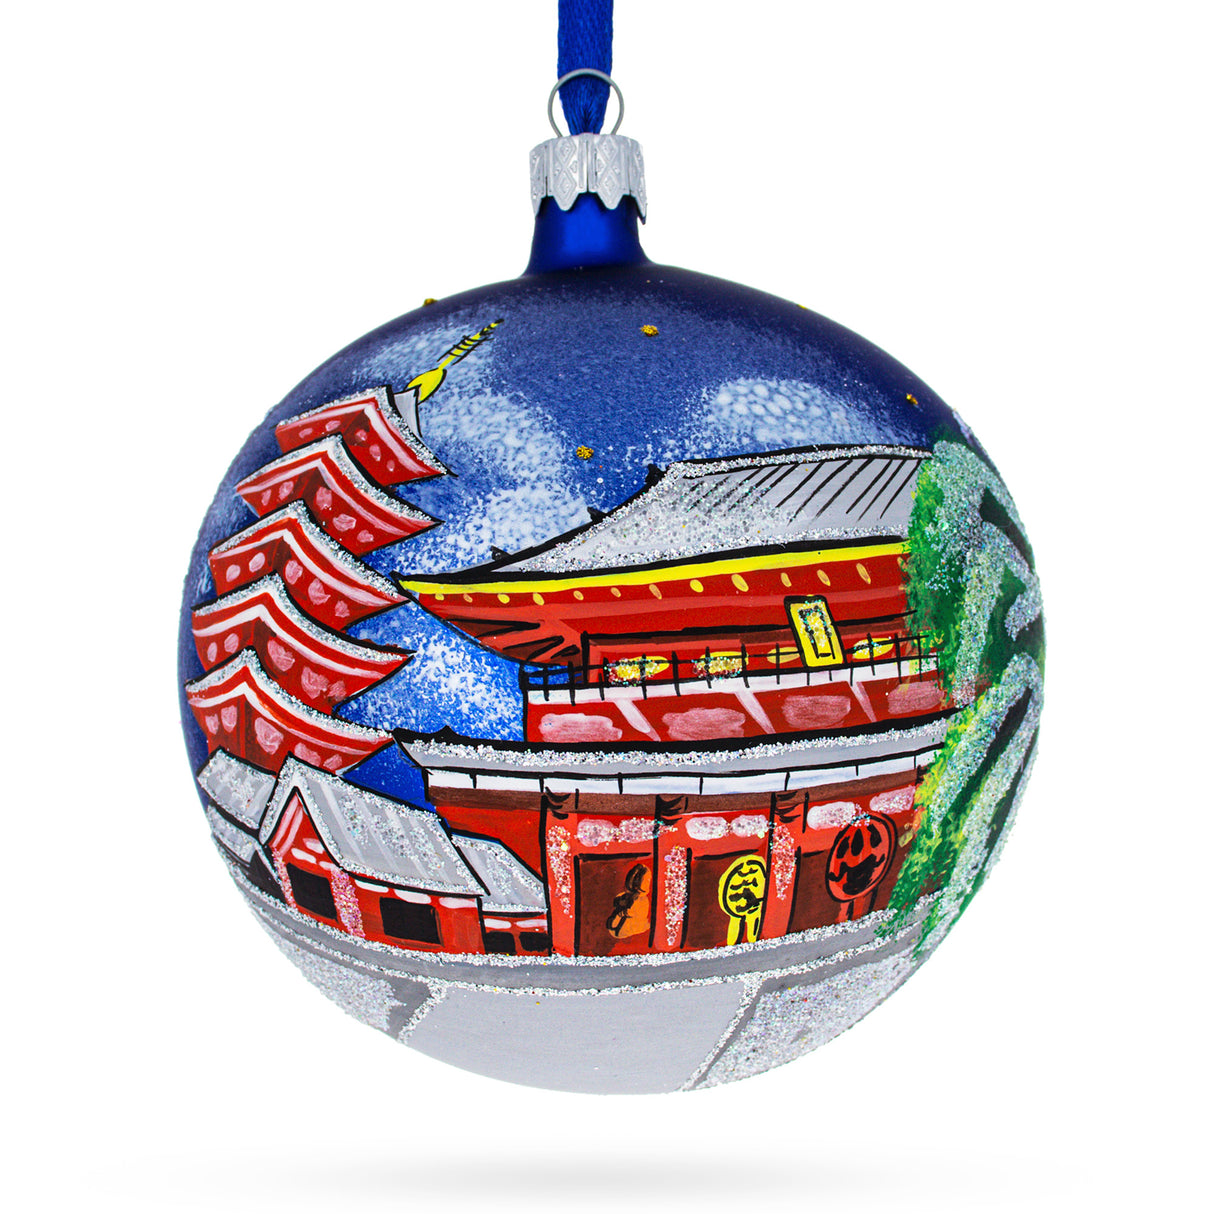 Glass Asakusa, Tokyo, Japan Glass Ball Christmas Ornament 4 Inches in Multi color Round